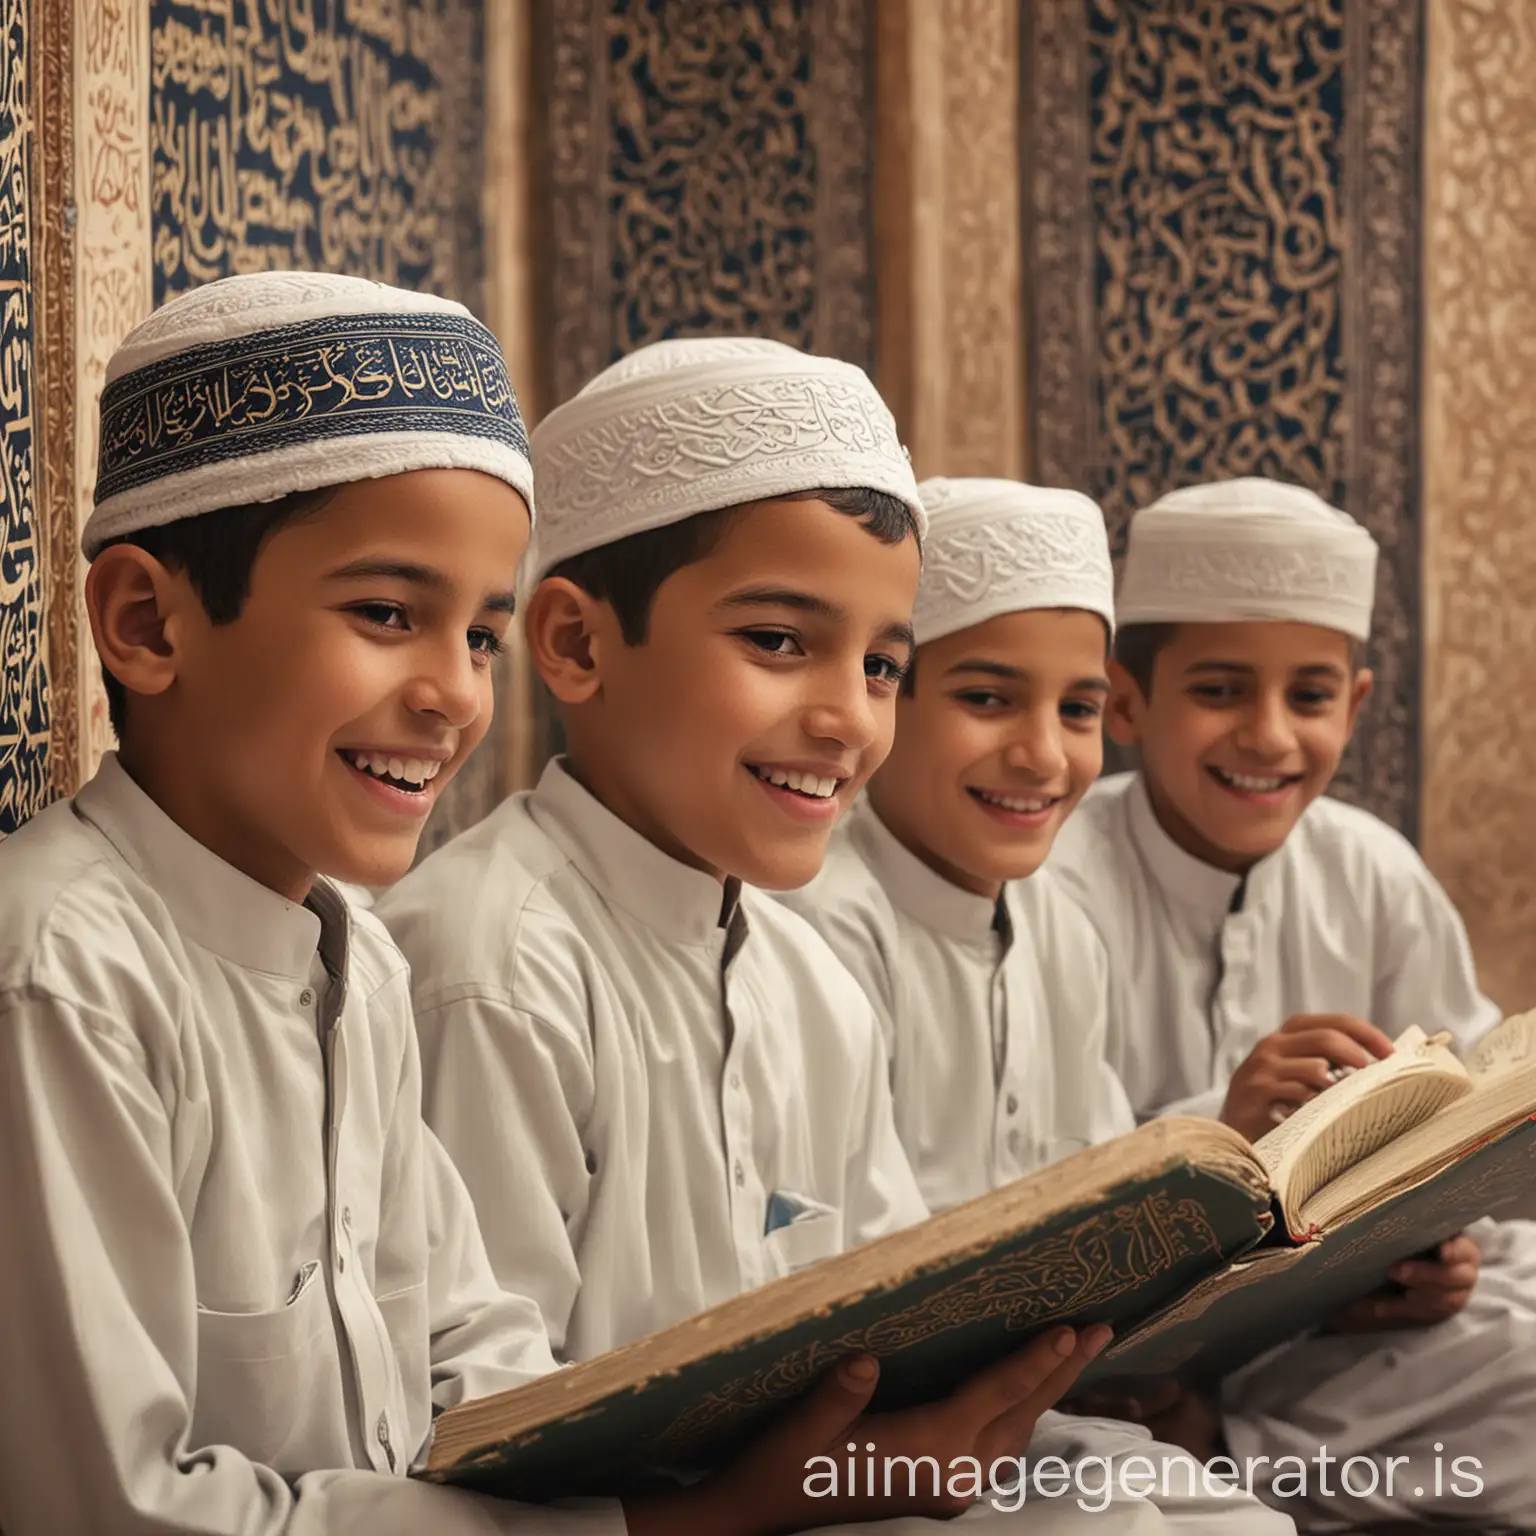 Boys-Smiling-While-Reading-Quran-in-Madrasa